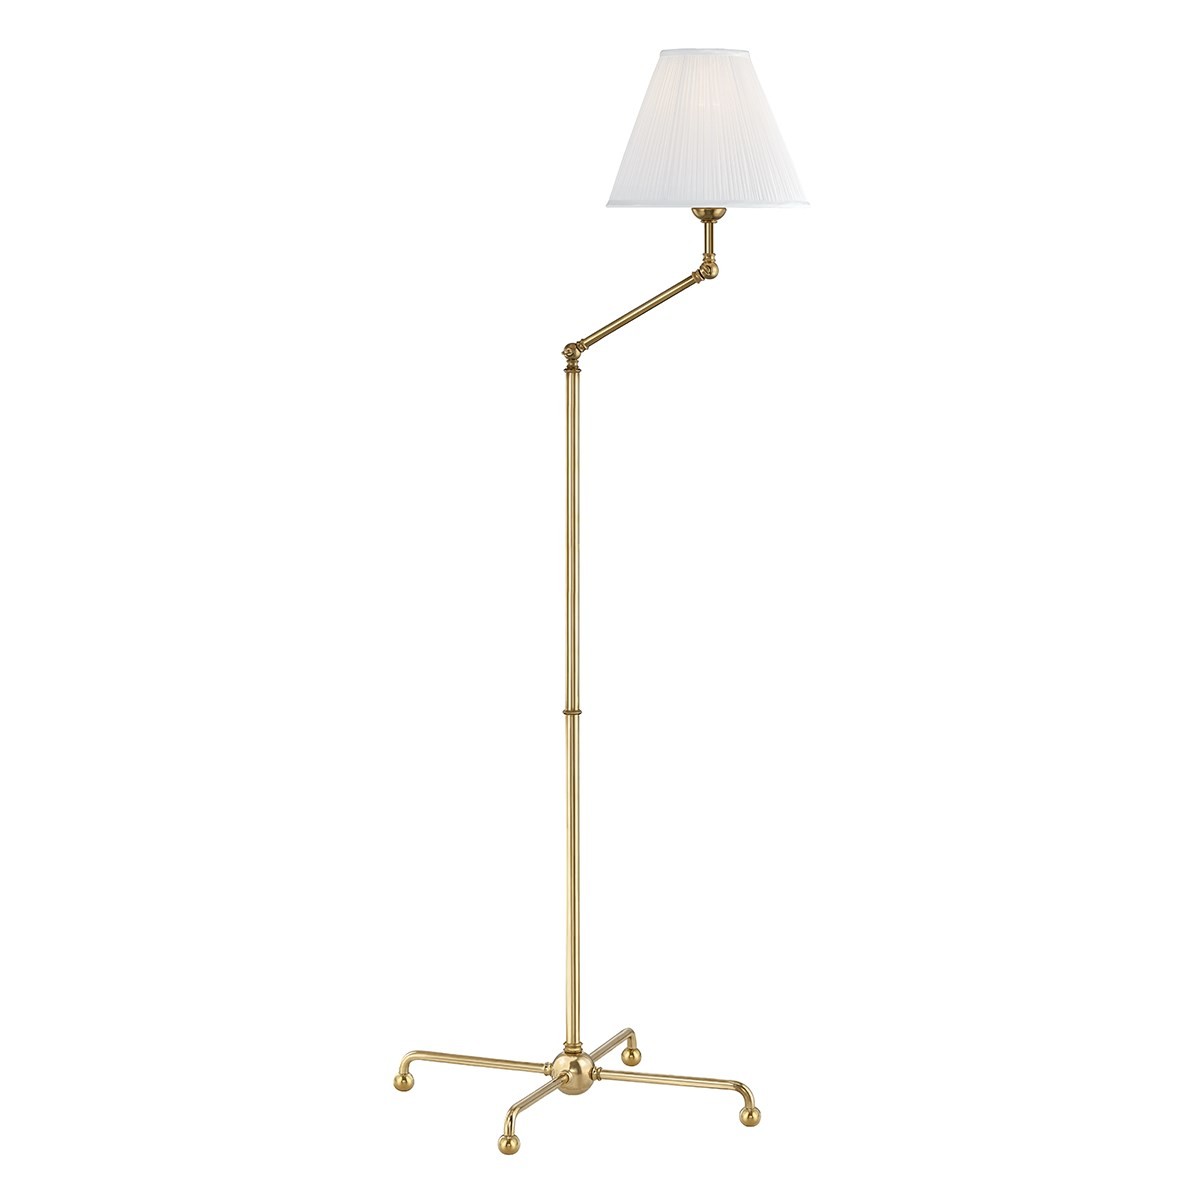 Hudson Valley I Classic No 1 Floor Lamp I Aged Brass